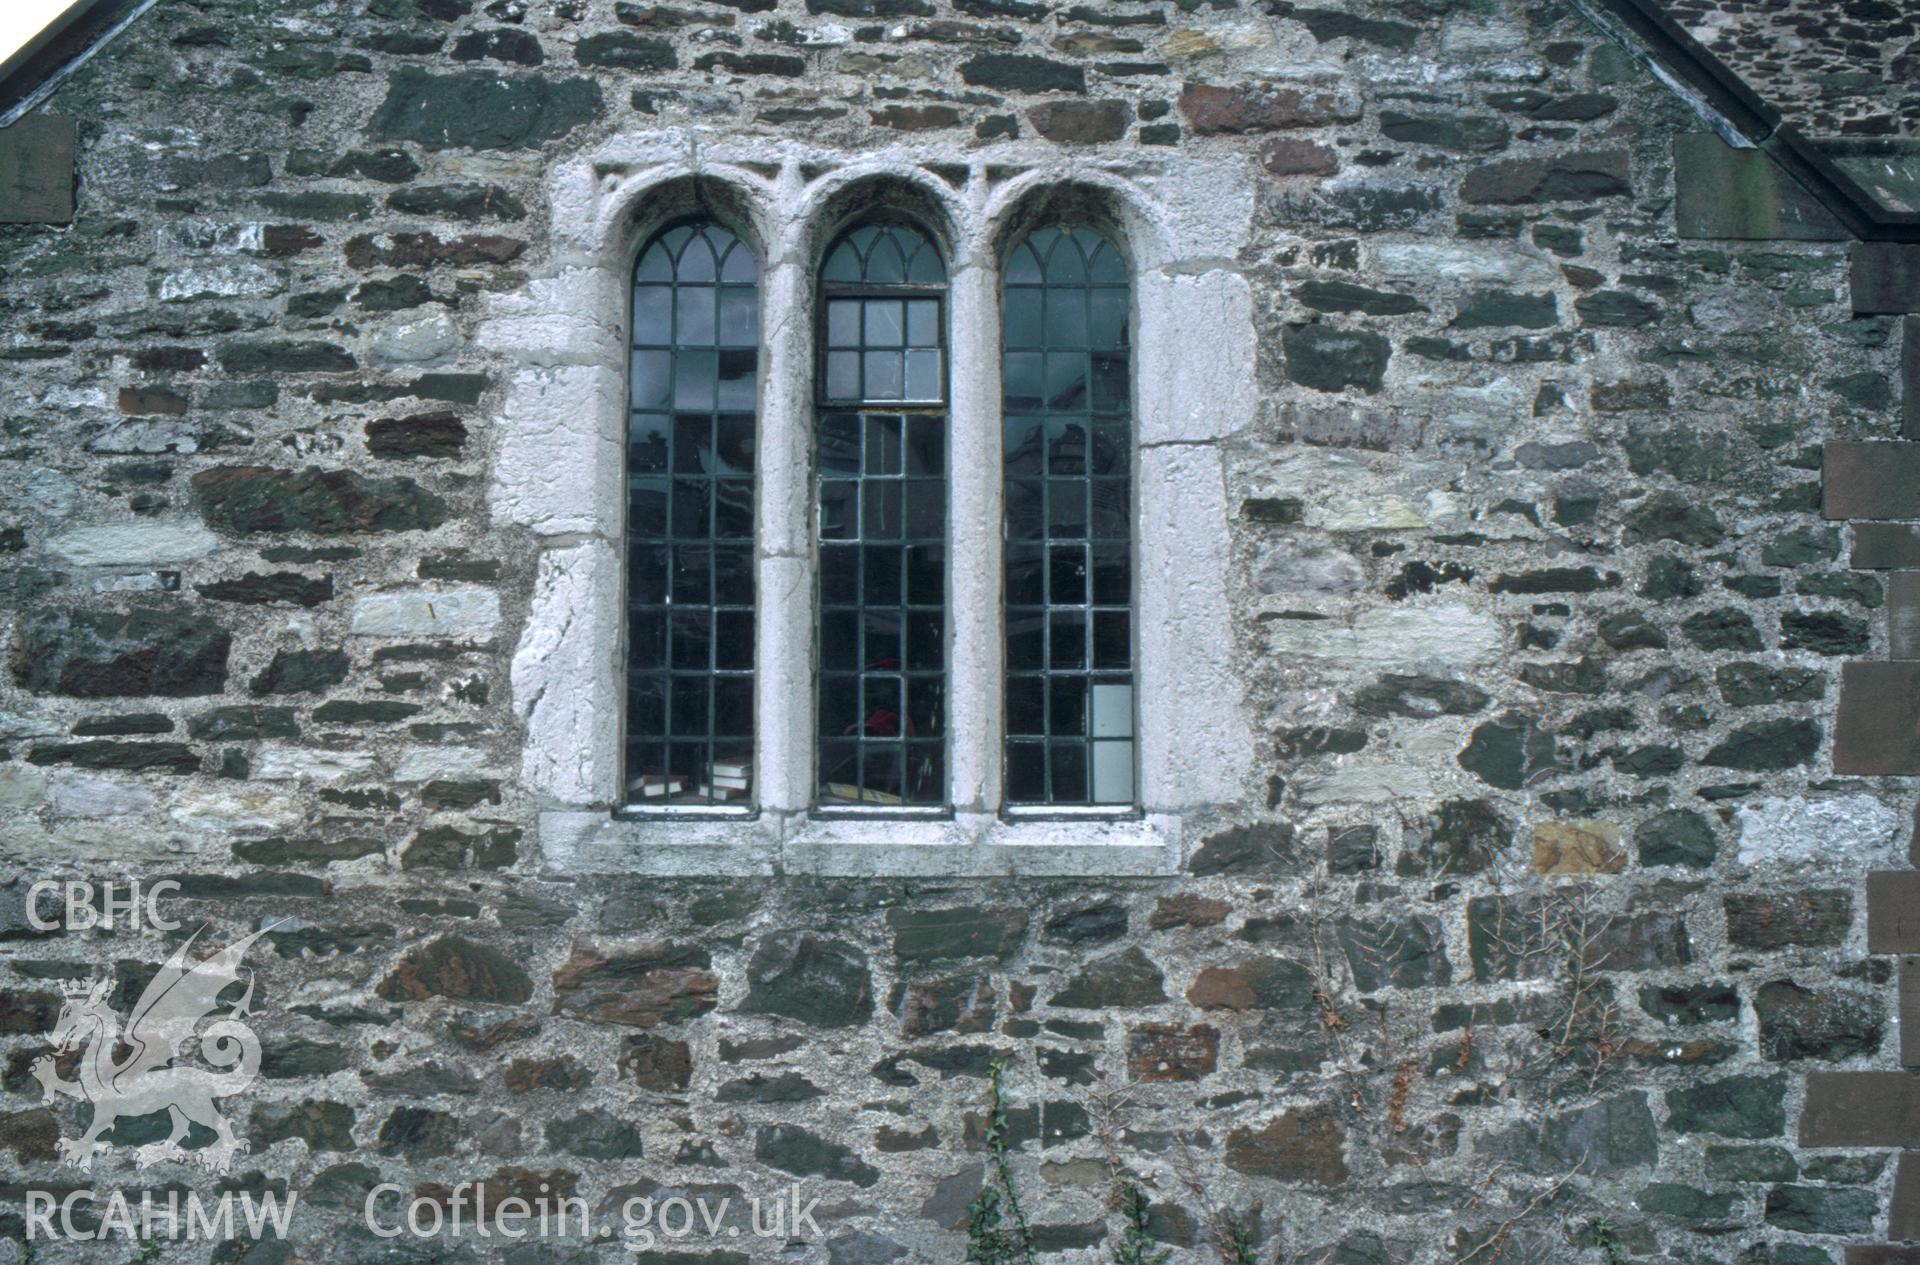 Colour slide showing exterior view of Conwy Church.